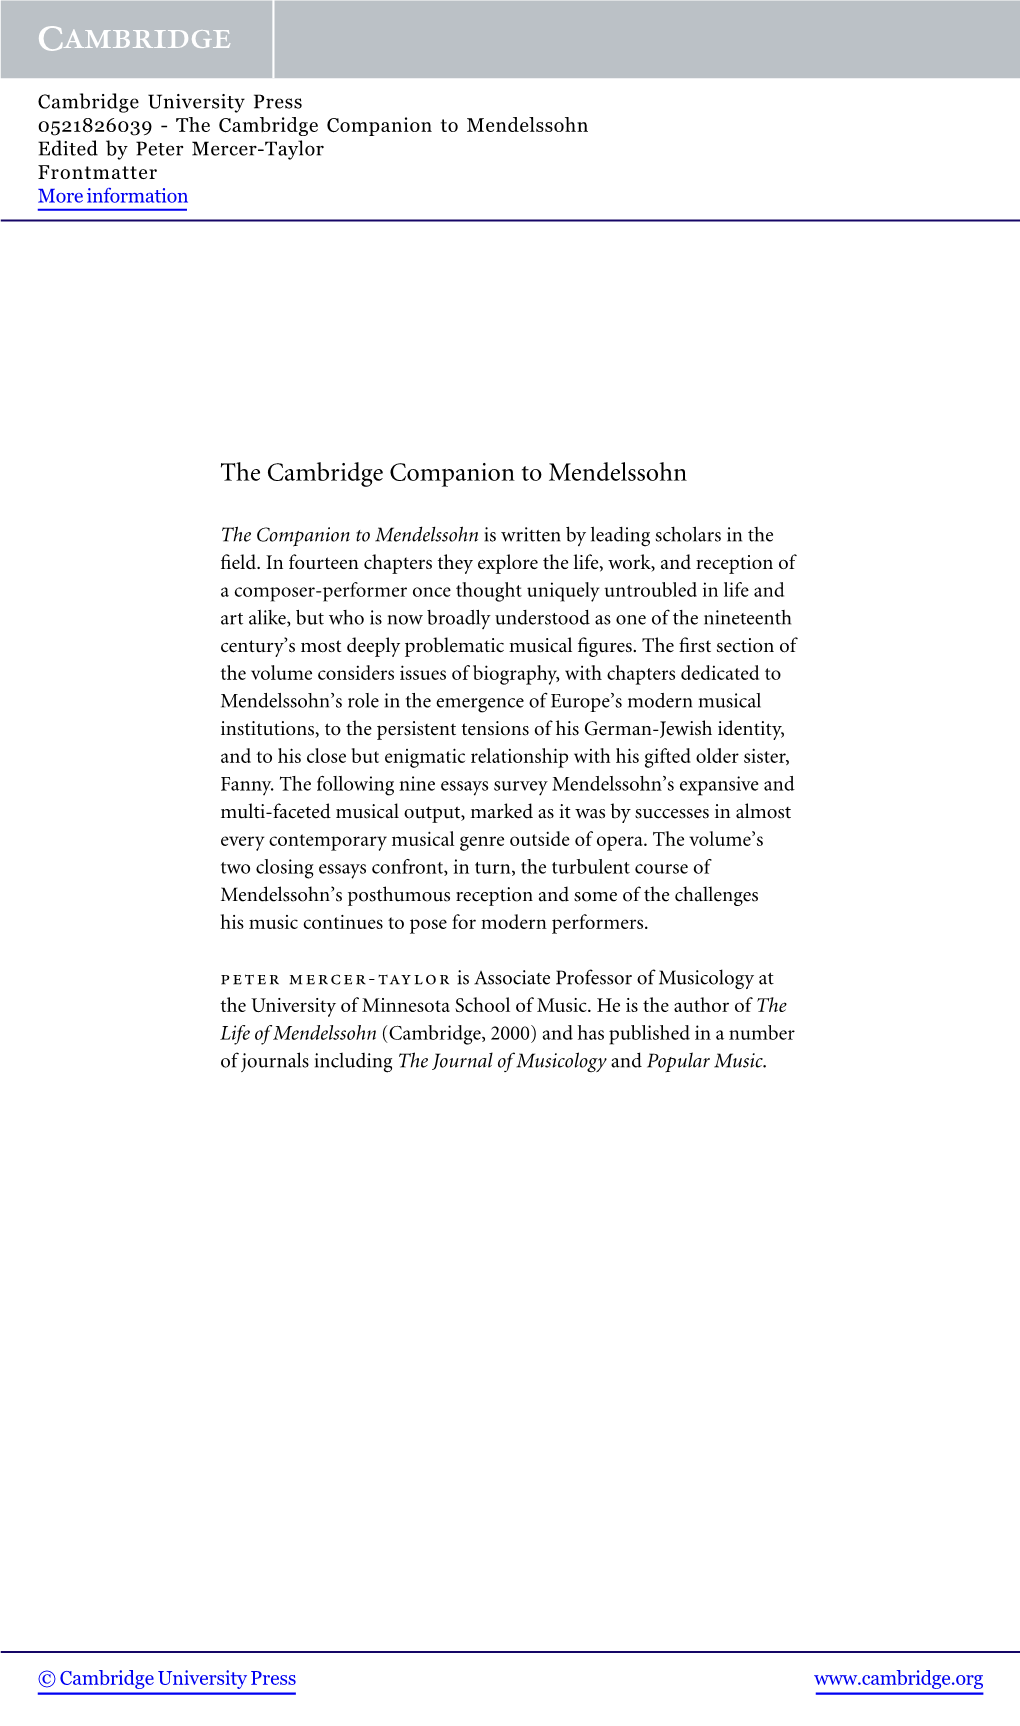 The Cambridge Companion to Mendelssohn Edited by Peter Mercer-Taylor Frontmatter More Information